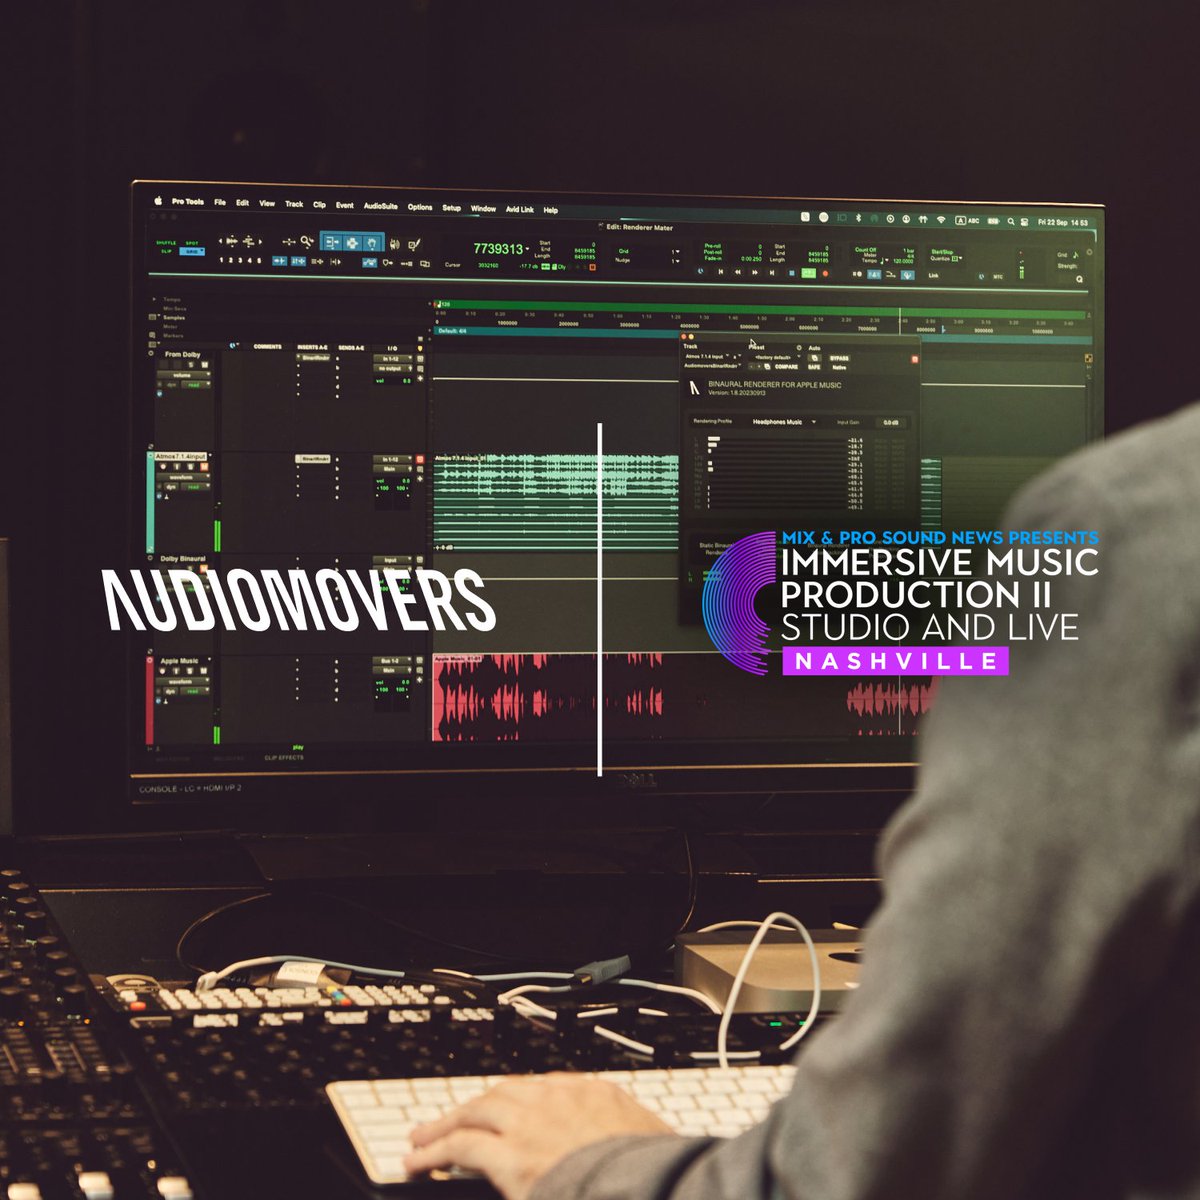 Audiomovers is proud to partner with @Mix_Magazine  and @ProSoundNews, alongside @Avid, @SweetwaterSound, and @PMCSpeakers, for the Nashville edition of Immersive Music Production II Studio and Live.

#Audiomovers #Listento #ProAudio #ImmersiveAudio